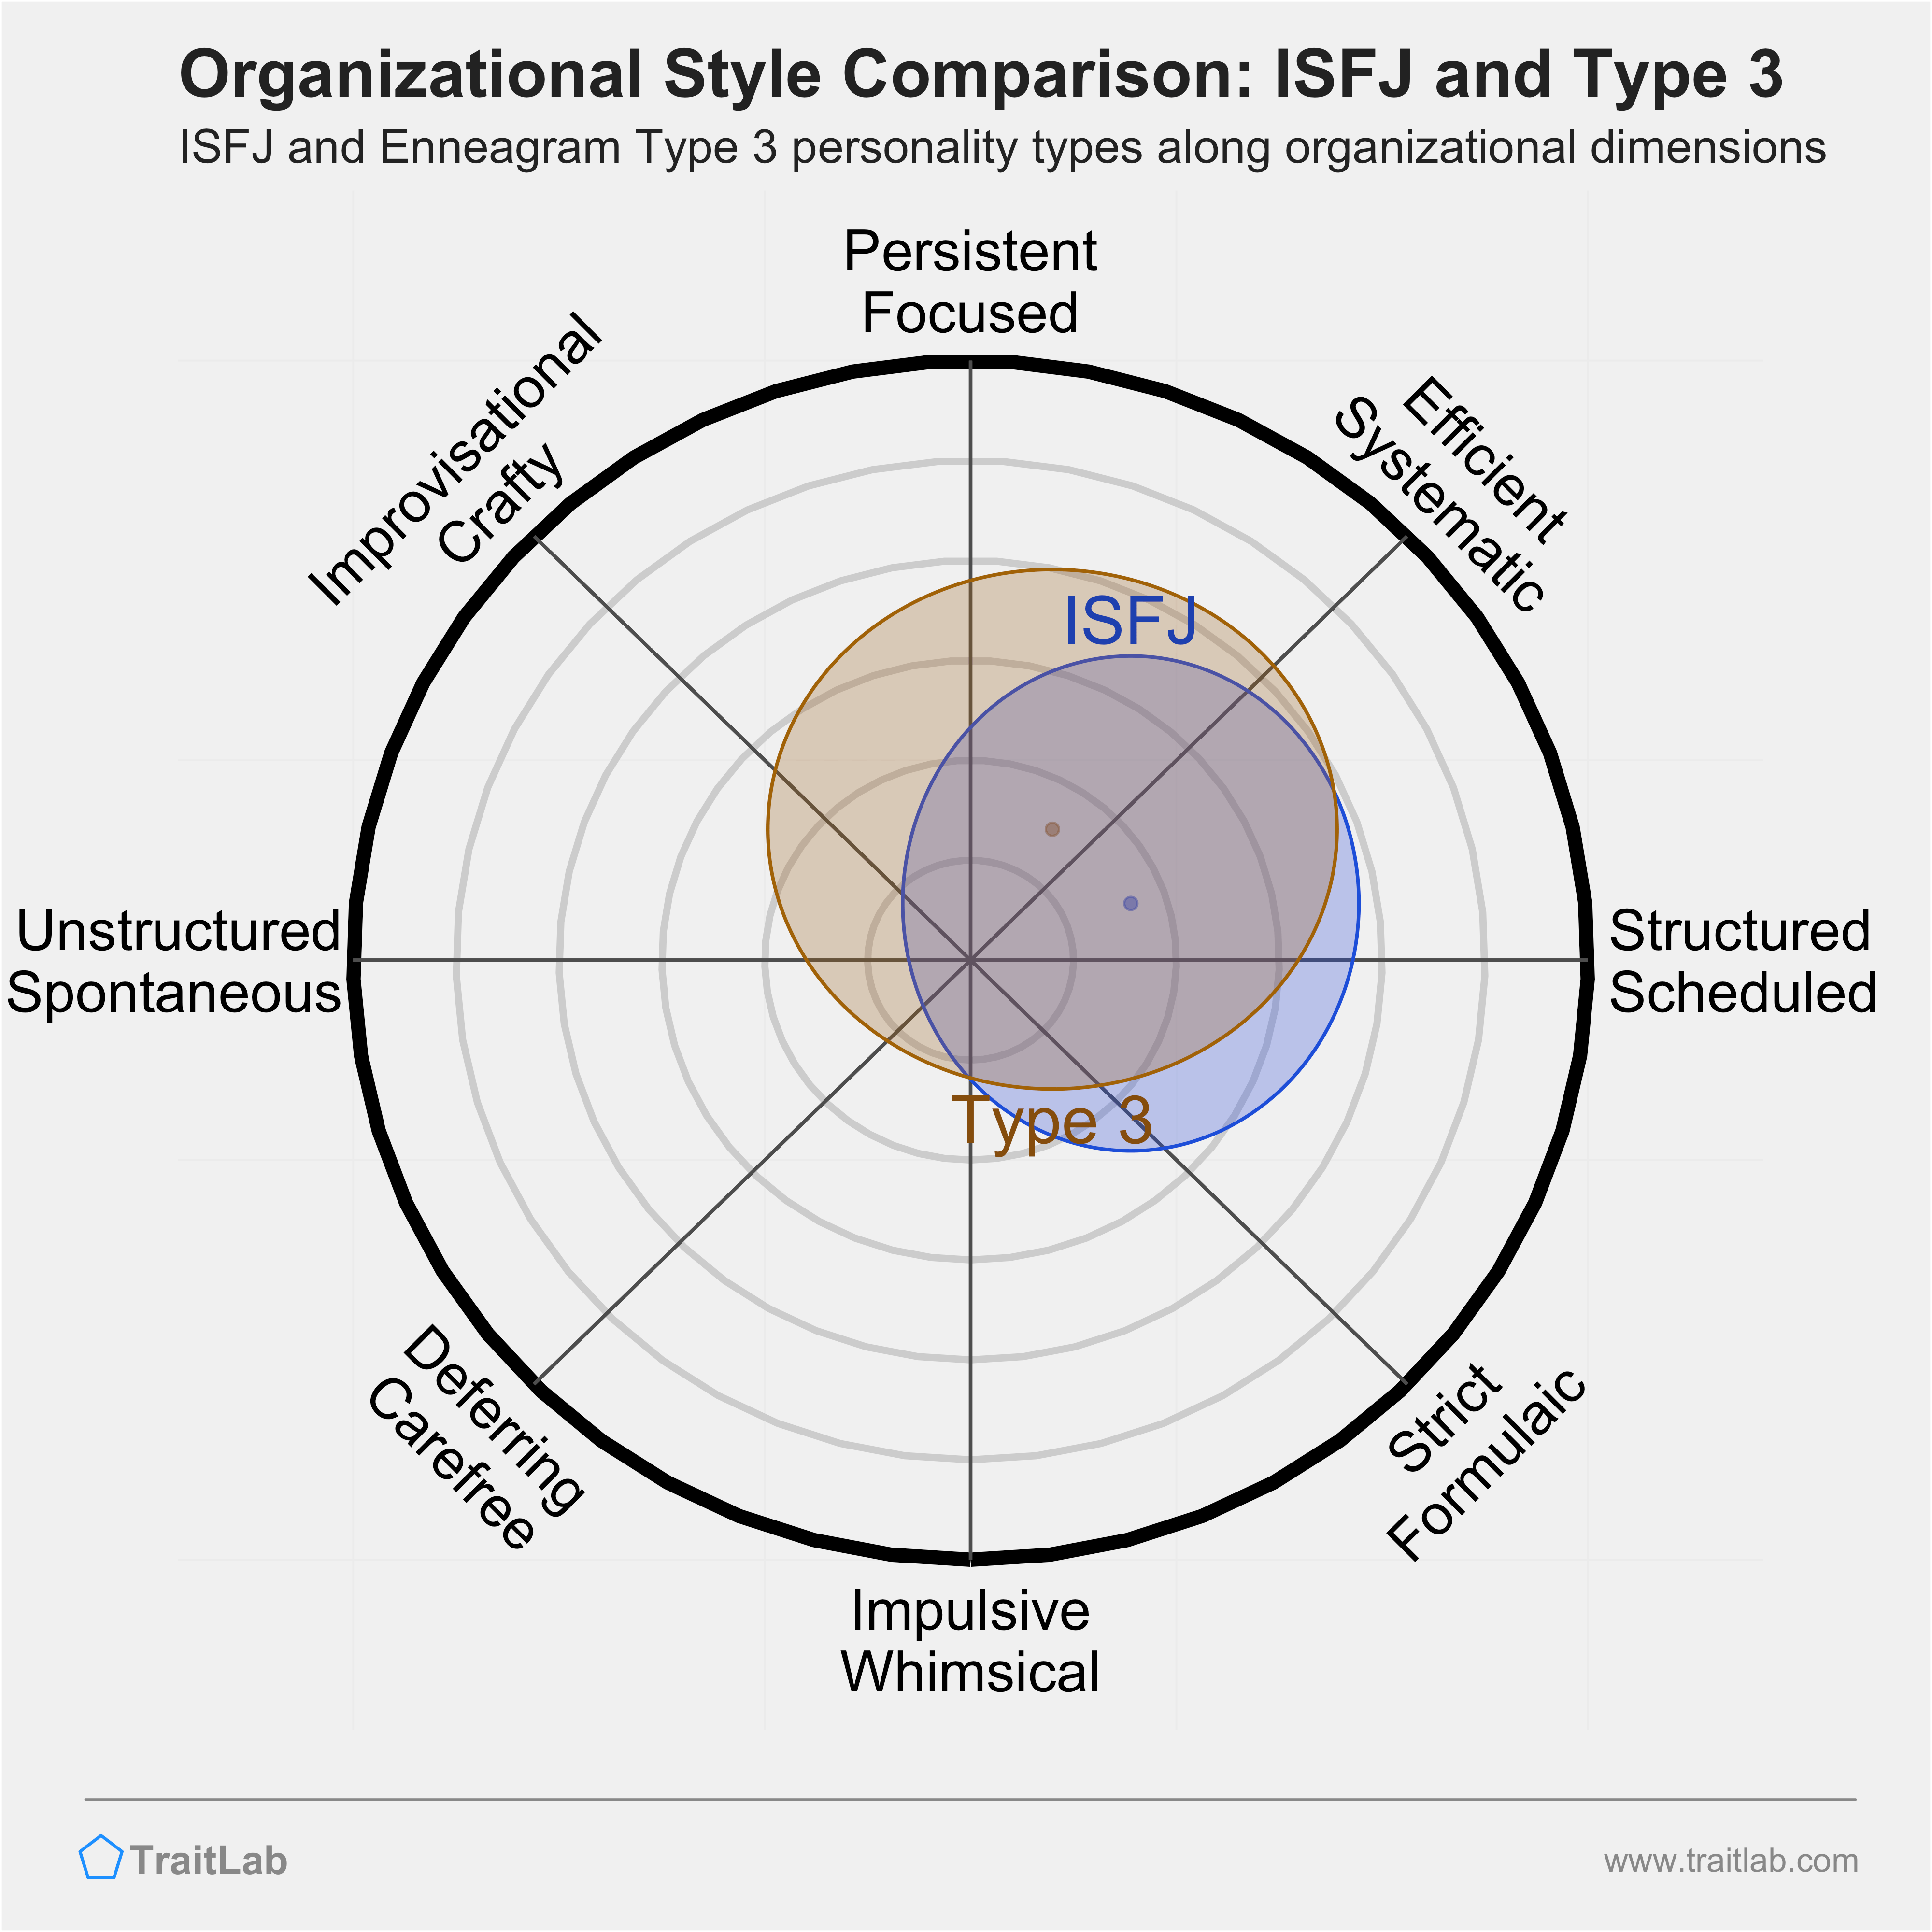 ISFJ and Type 3 comparison across organizational dimensions